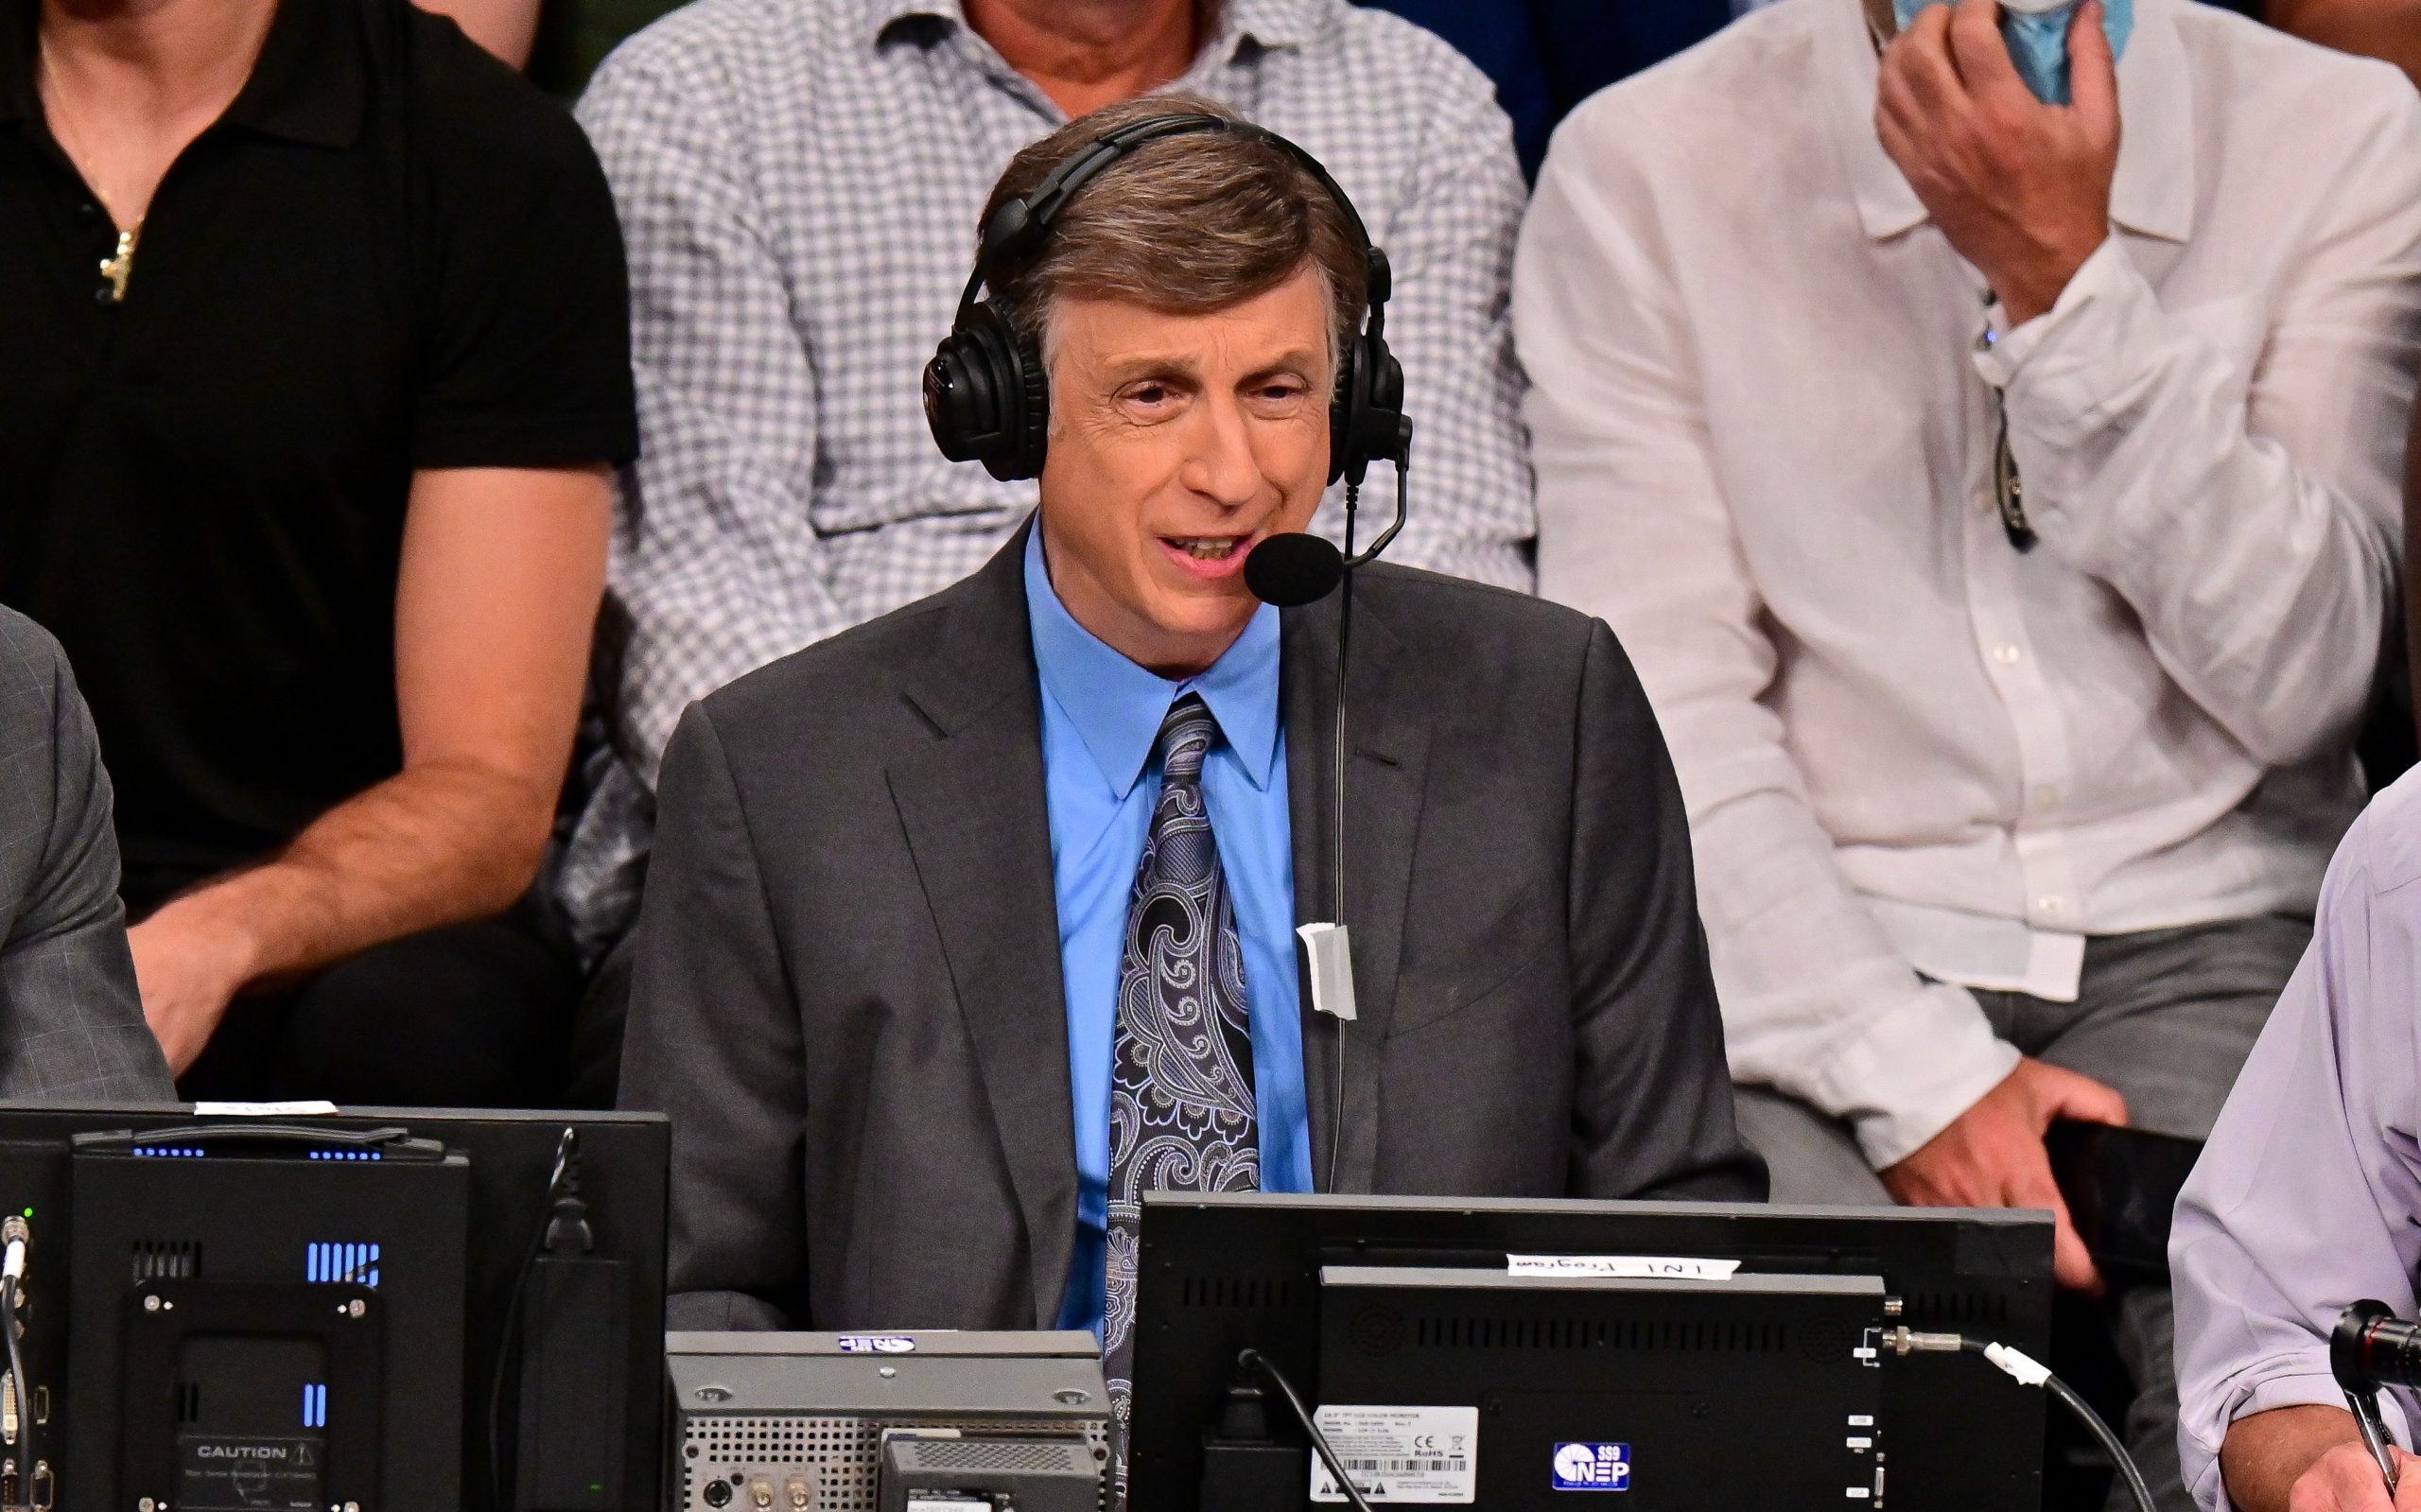 Marv Albert broadcasting the game between the Brooklyn Nets and the Milwaukee Bucks on June 15.